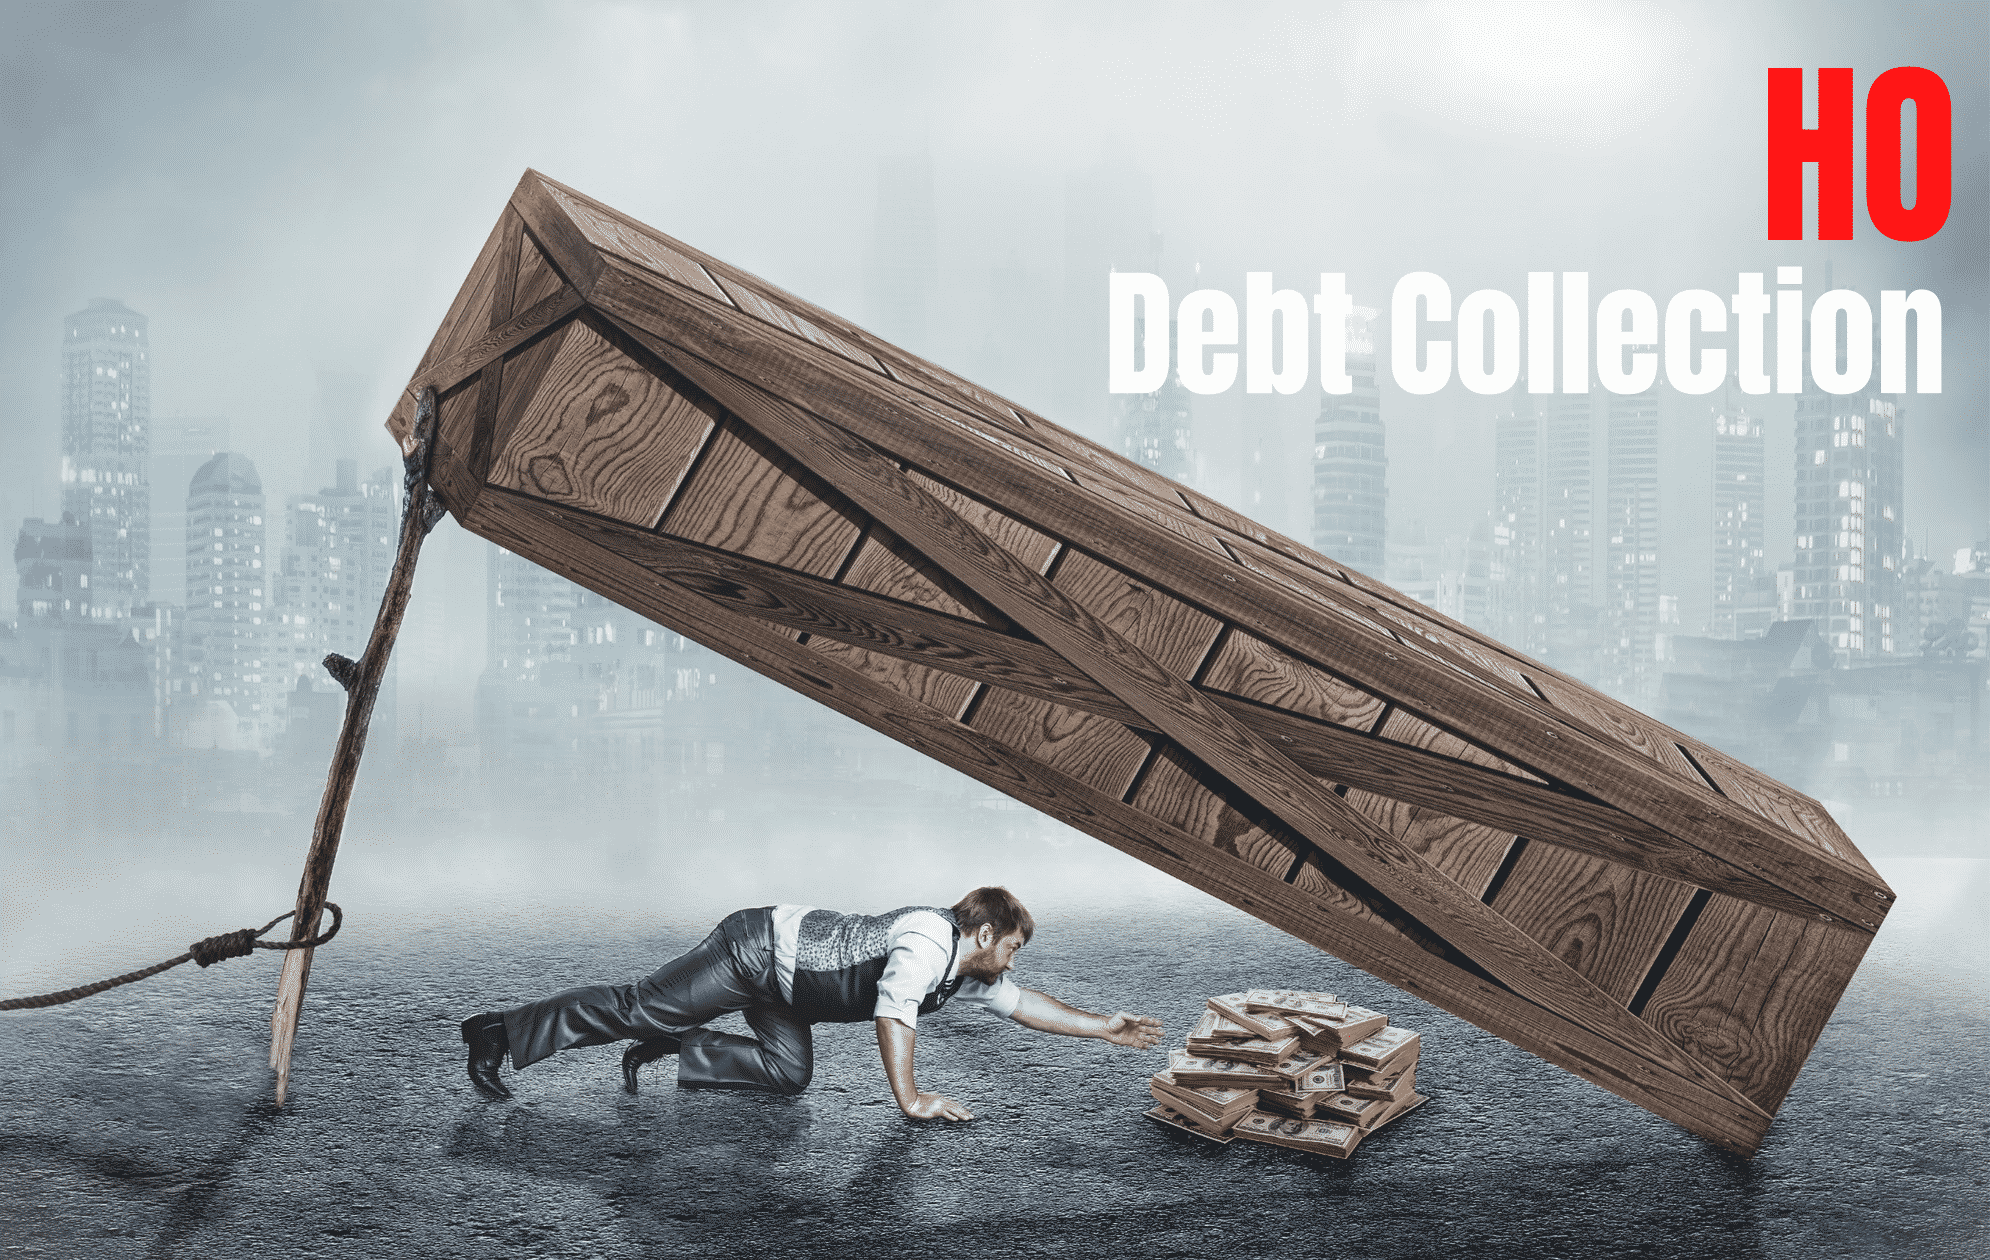 HO-debt-collection